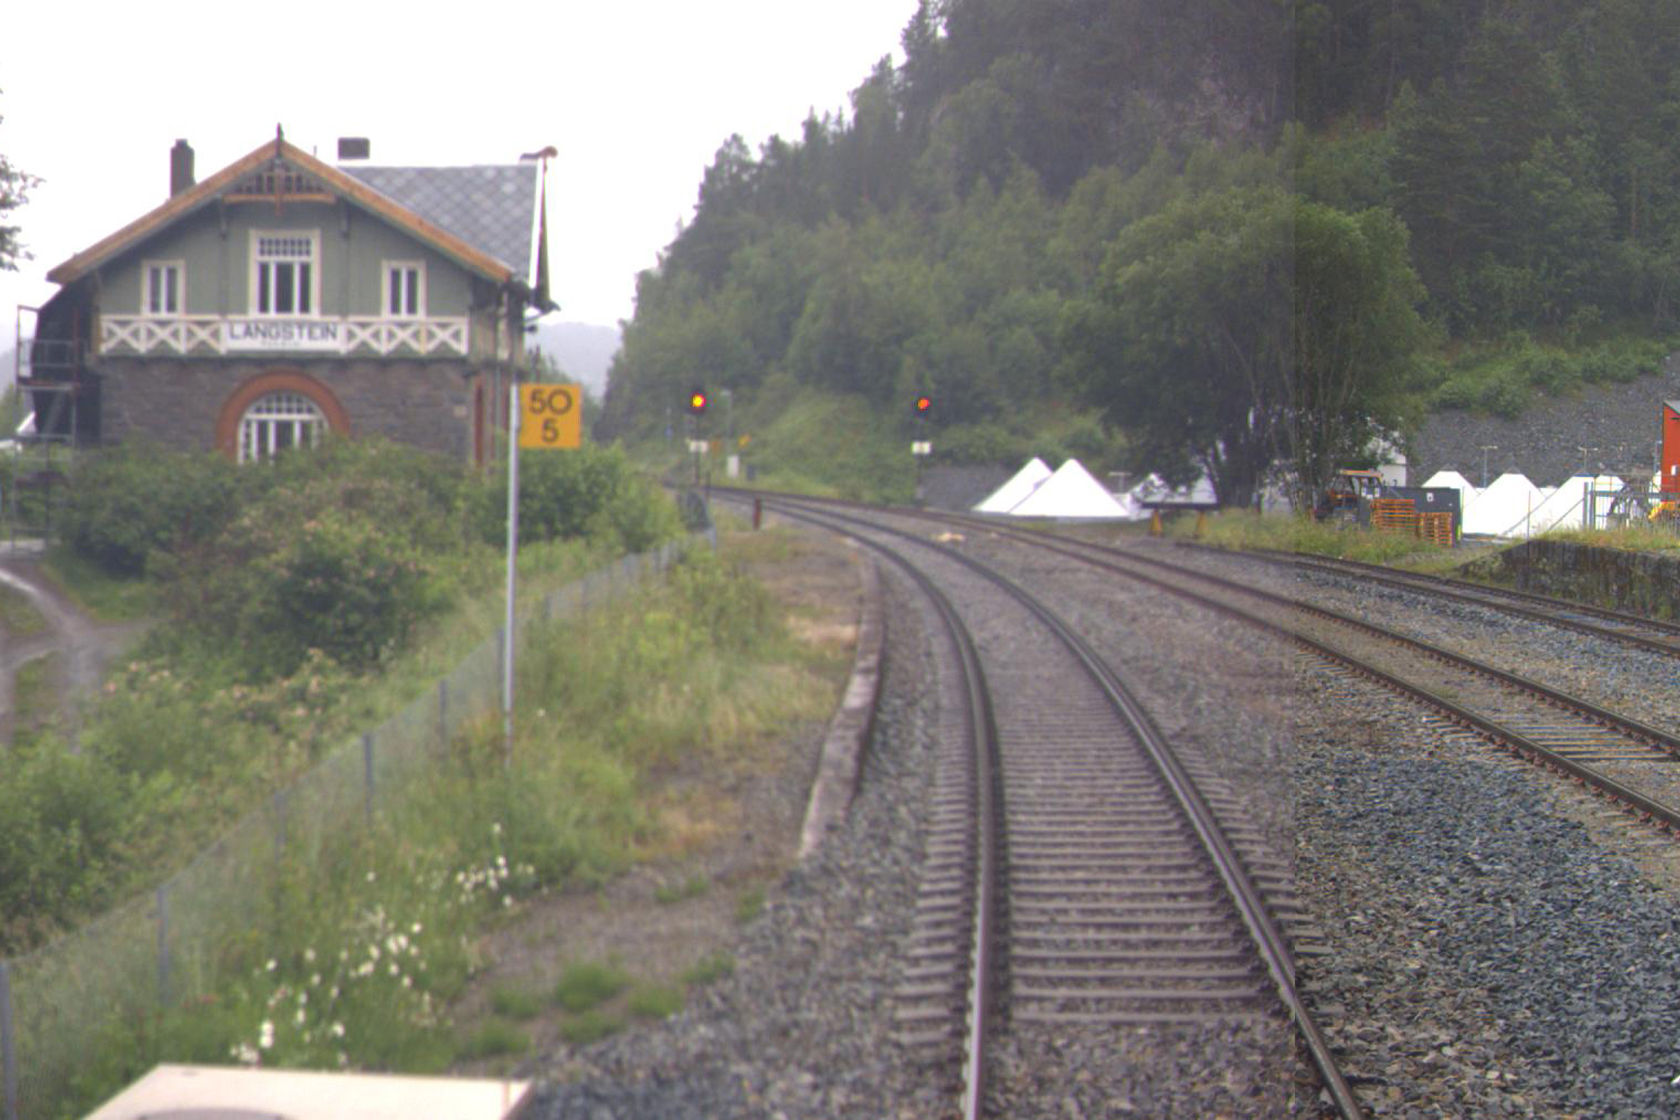 Tracks and station building at Langstein station